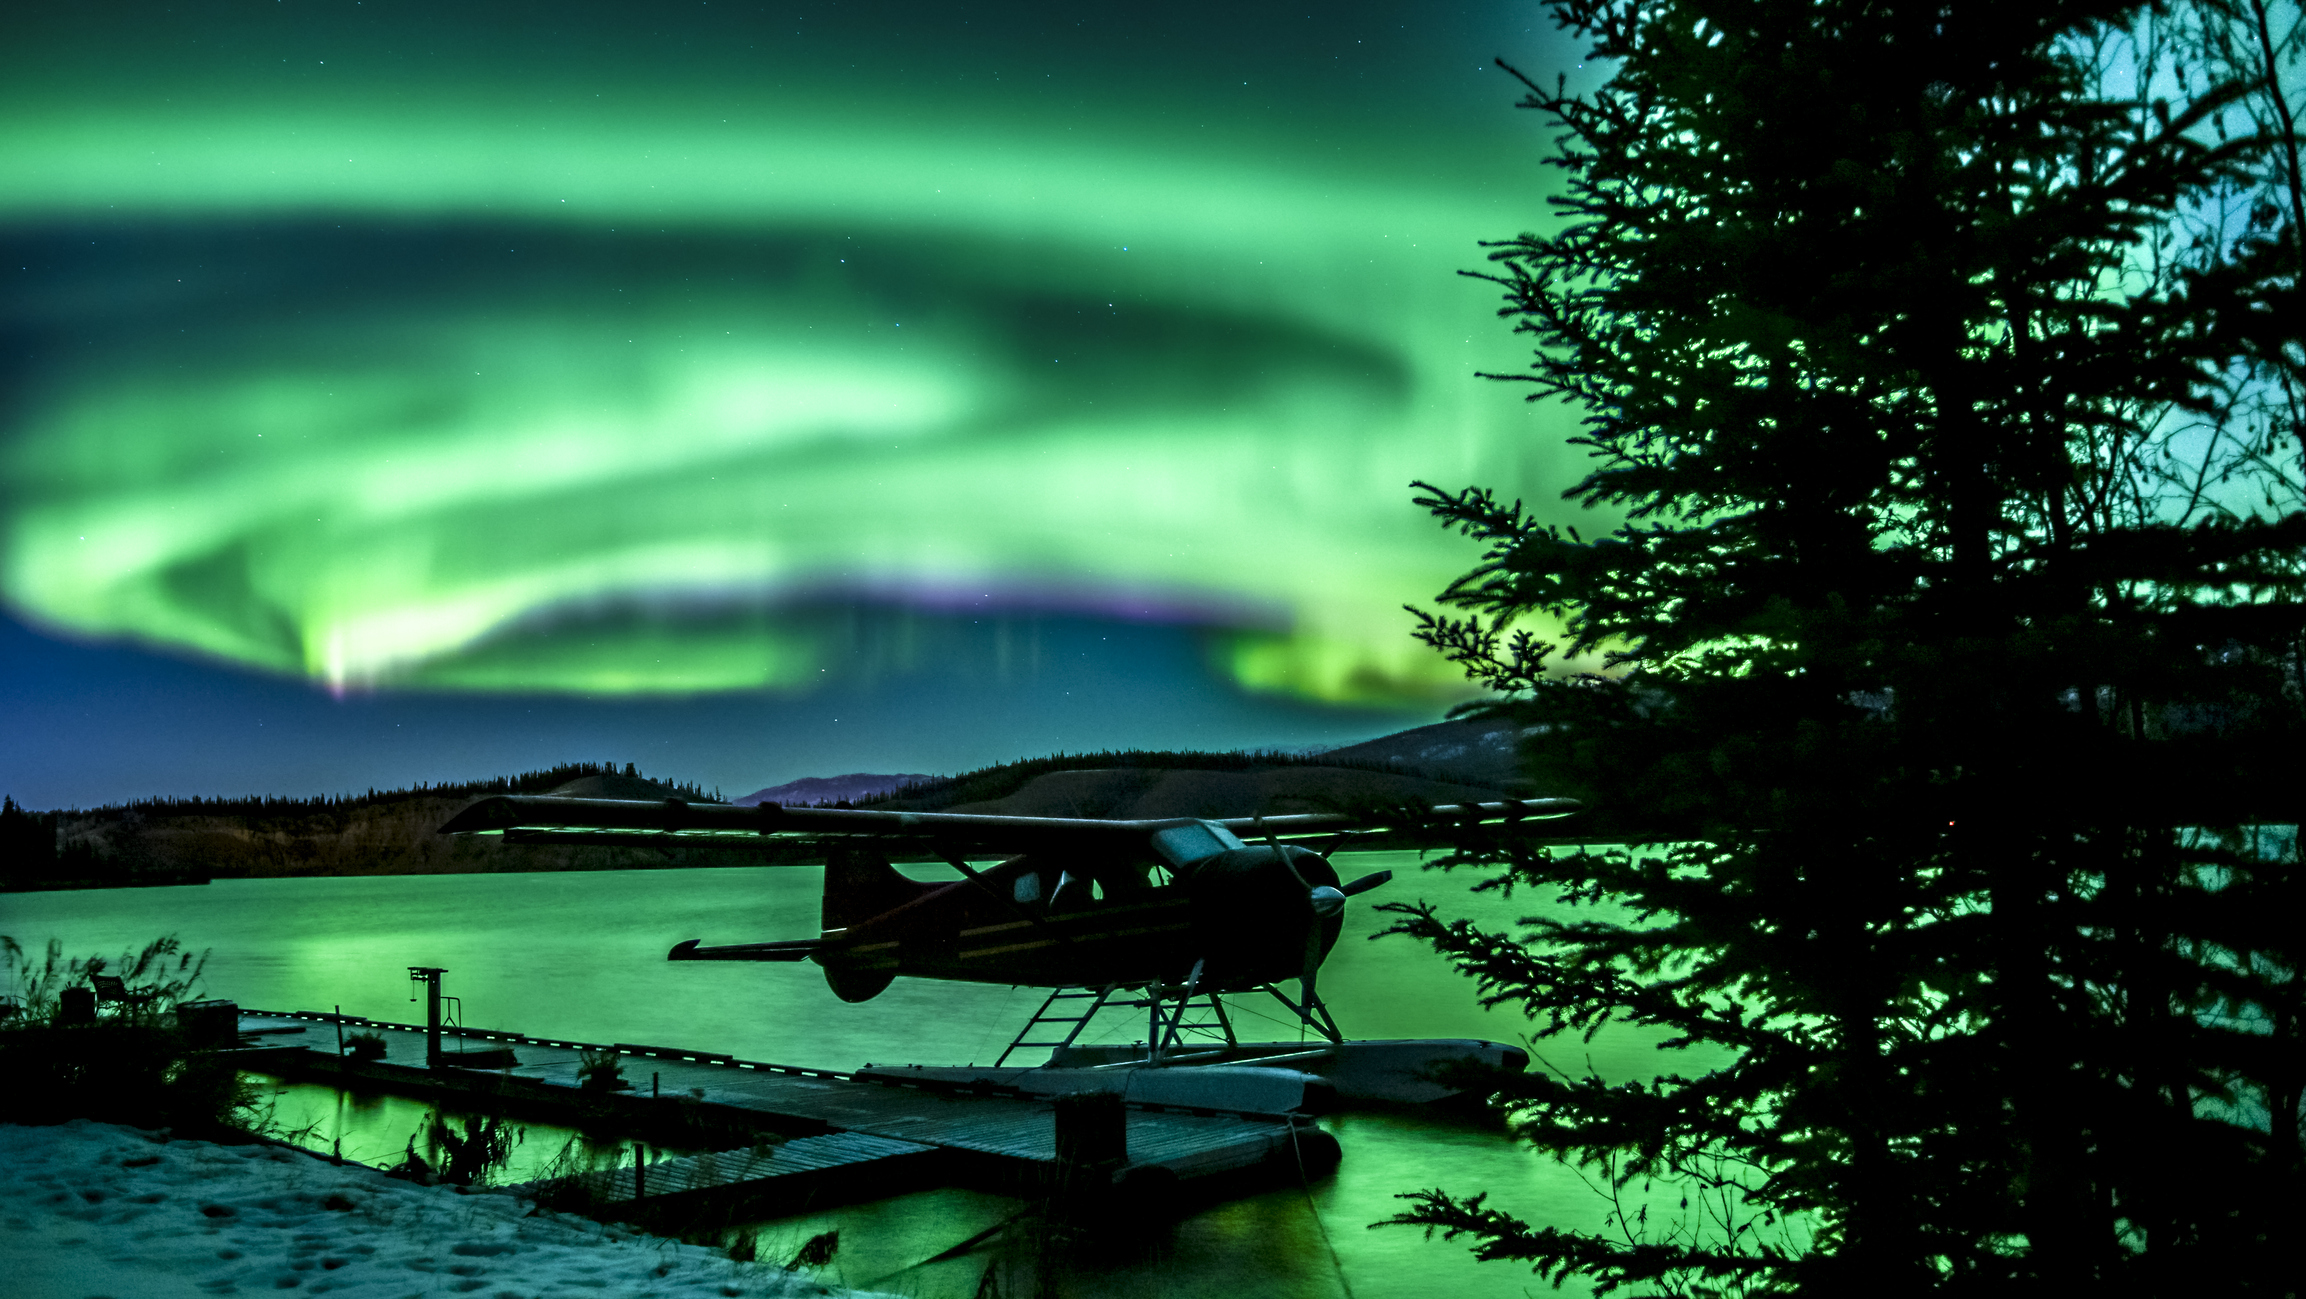 Bush plane on a lake under the northern lights in Yellowknife